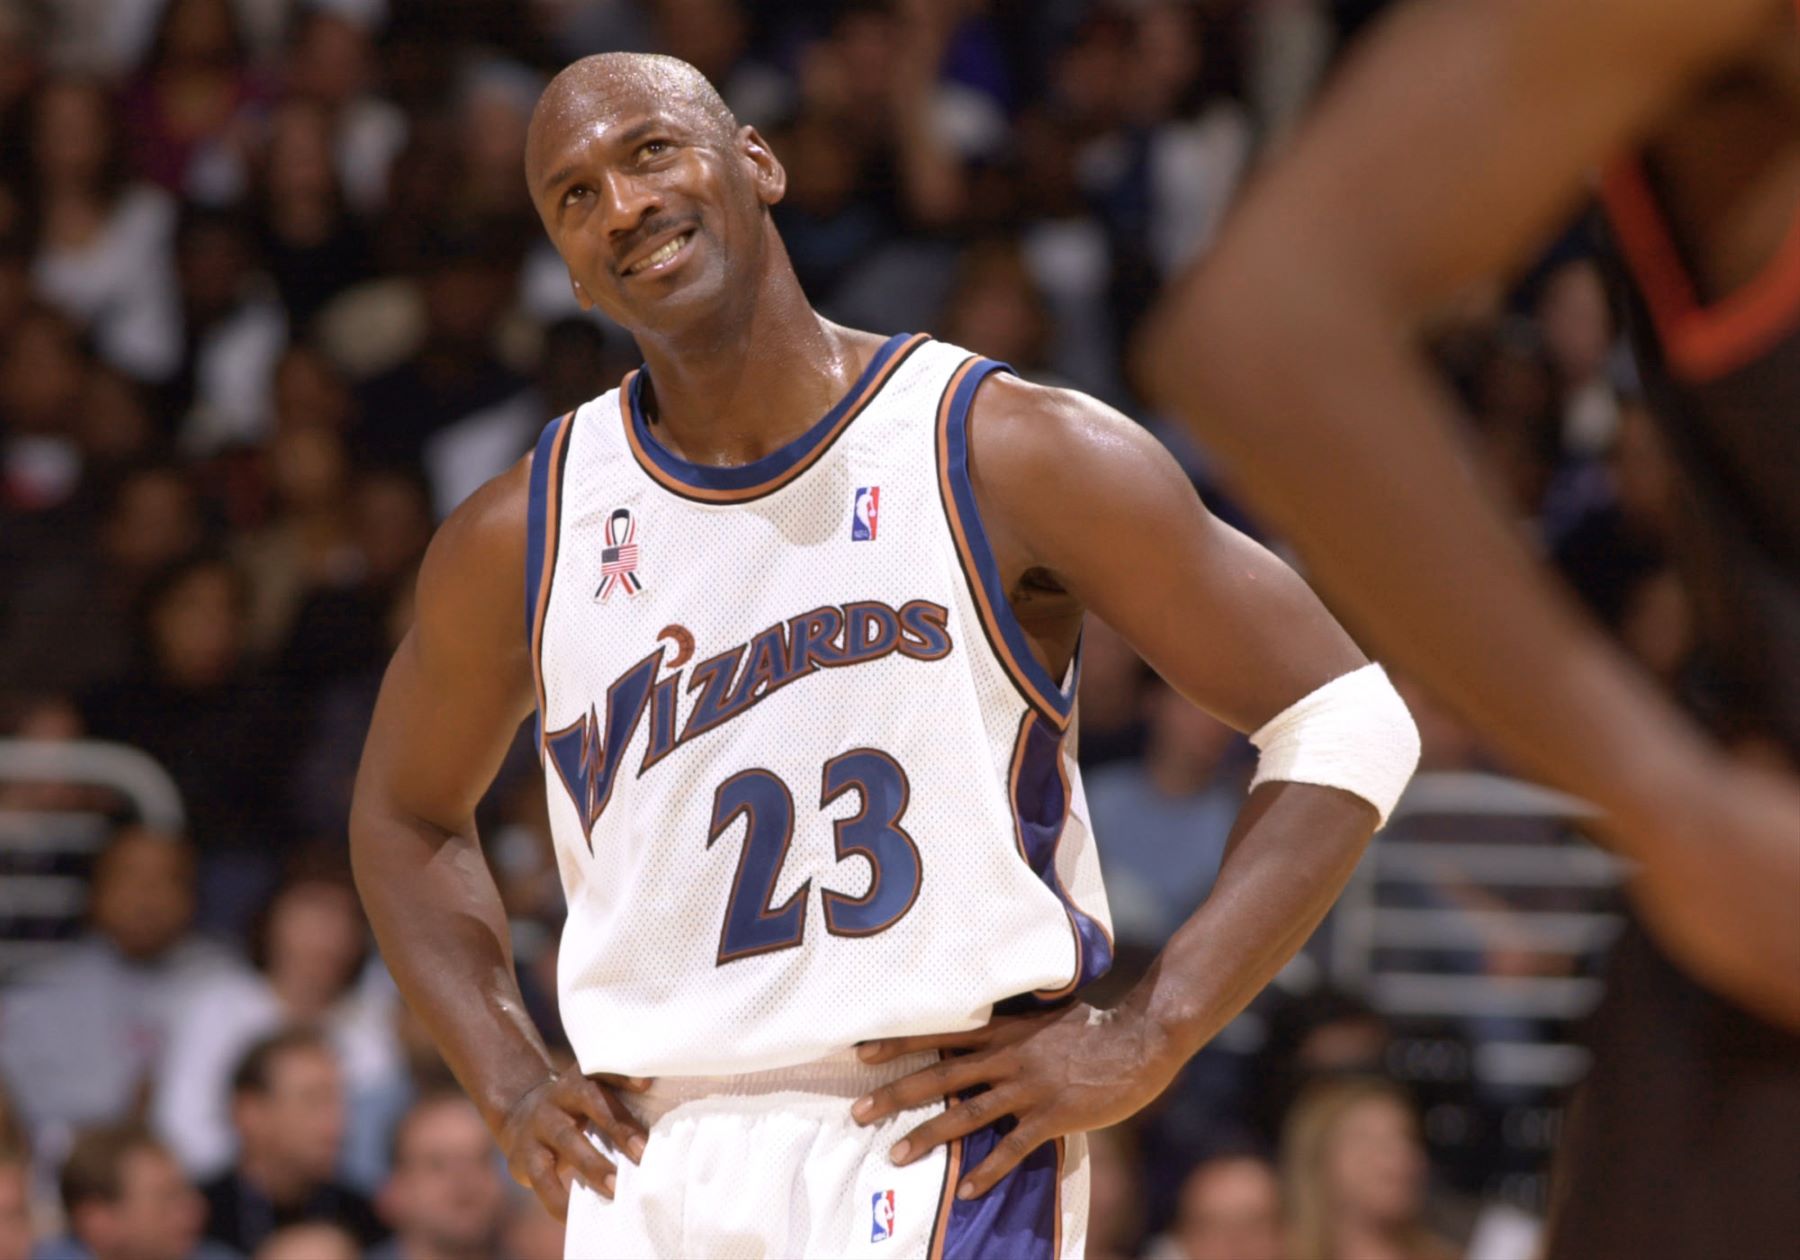 Michael Jordan #23 of the Washington Wizards during a game against the Philadelphia 76ers at the MCI Center